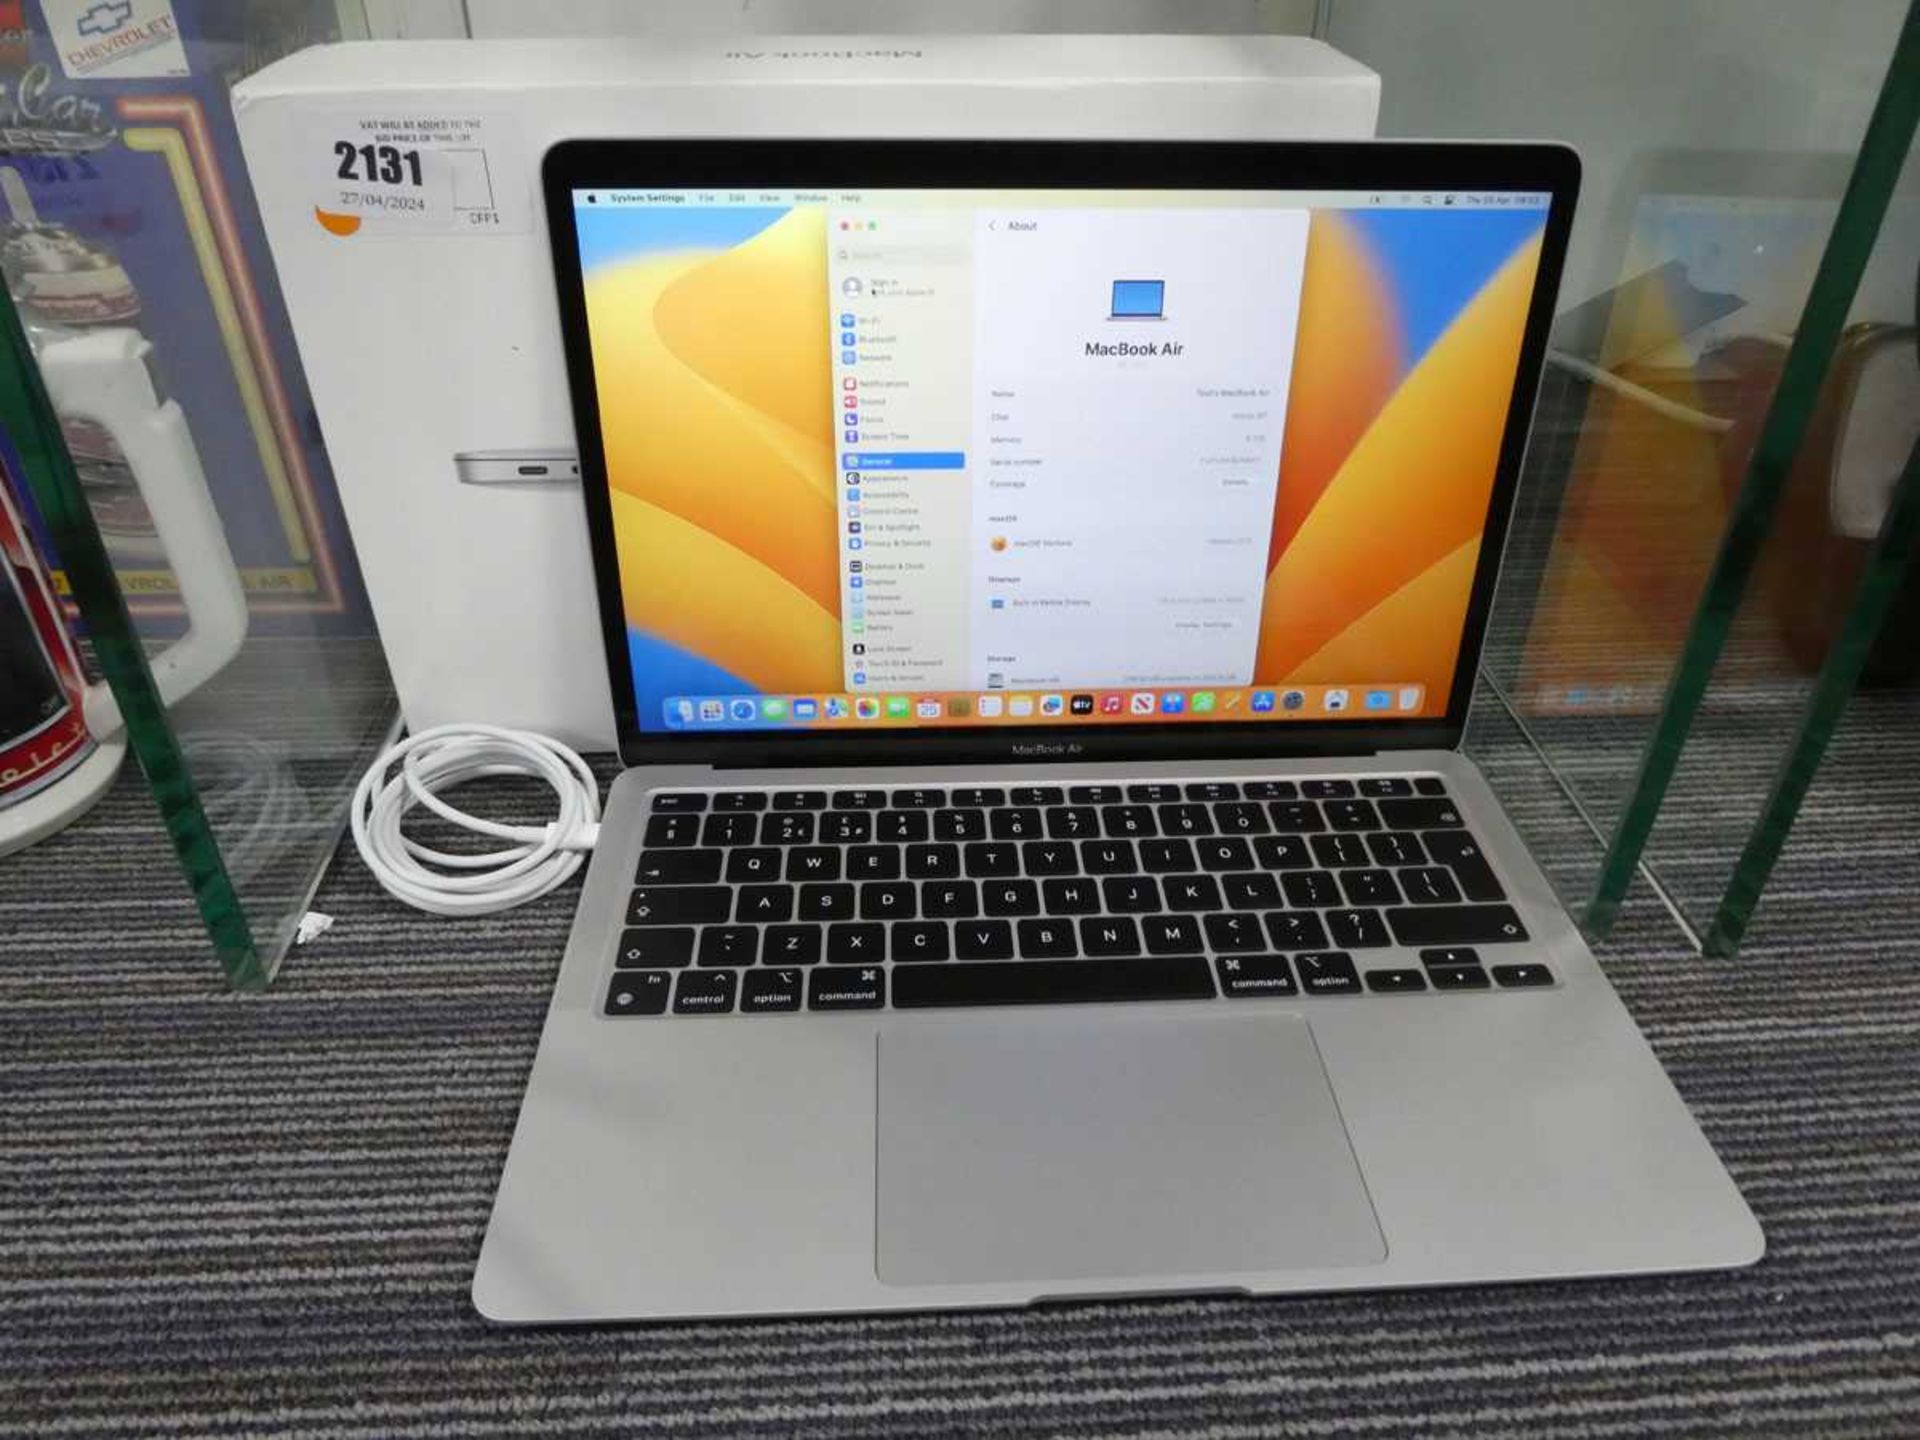 +VAT Apple 13" Macbook Air with Apple M1 chip, 8 GB Memory, 256 GB SSD, MGM93B/A